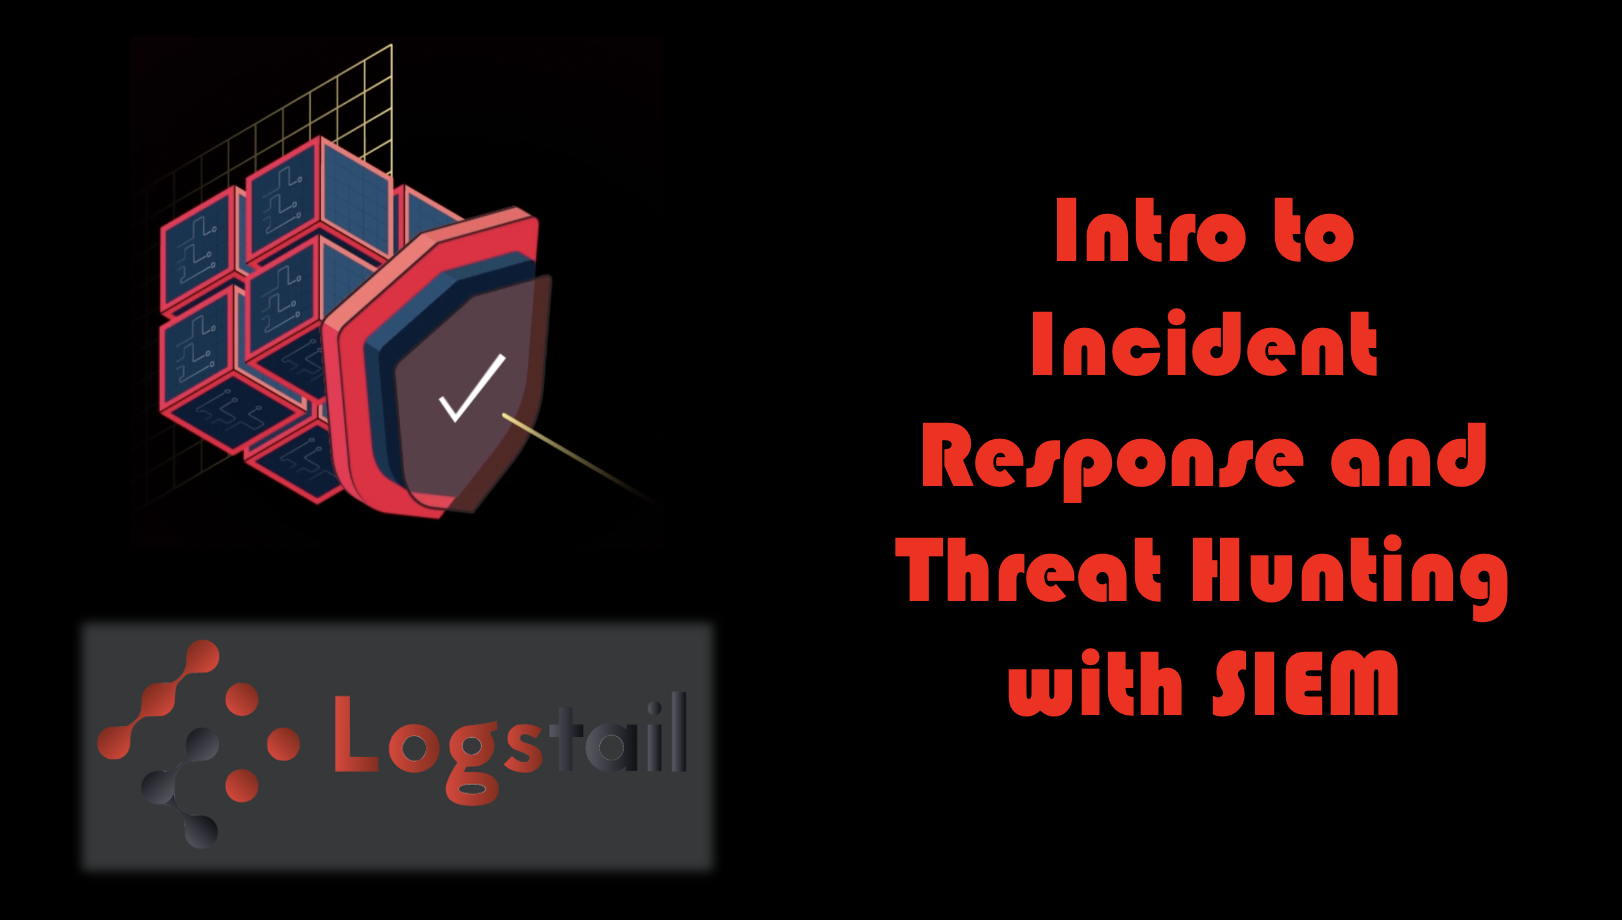 Intro to Incident Response and Threat Hunting with a SIEM